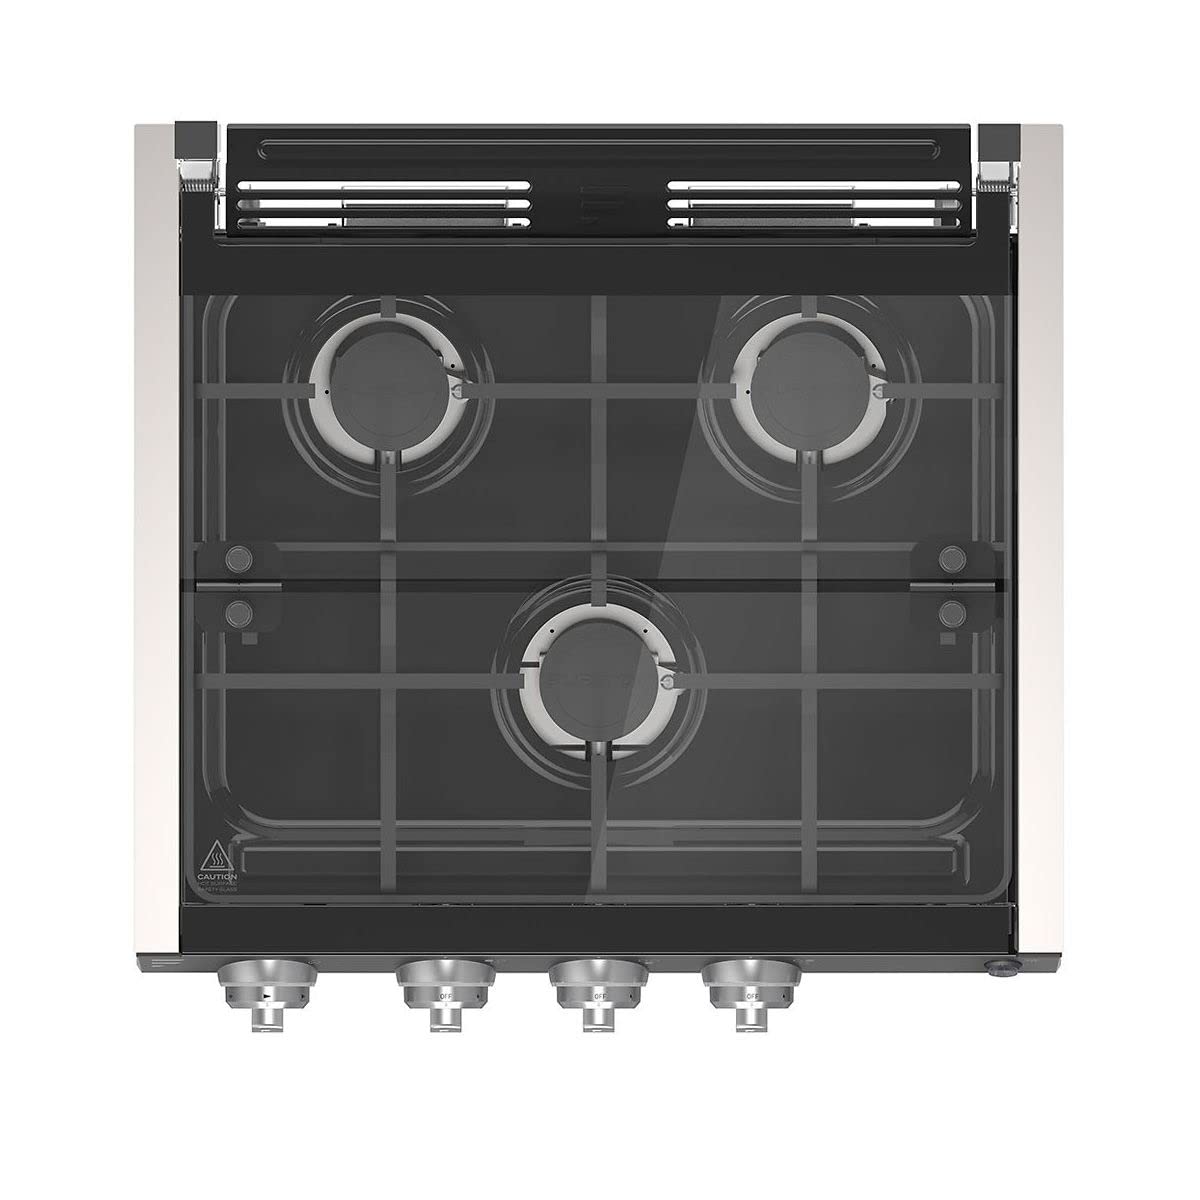 RANGE COOKTOP MATCH W/17IN & 21IN RANGE OVEN BLK W/LED KNOBS (PAINTED SLVR) + WIRED GRILL + GLASS